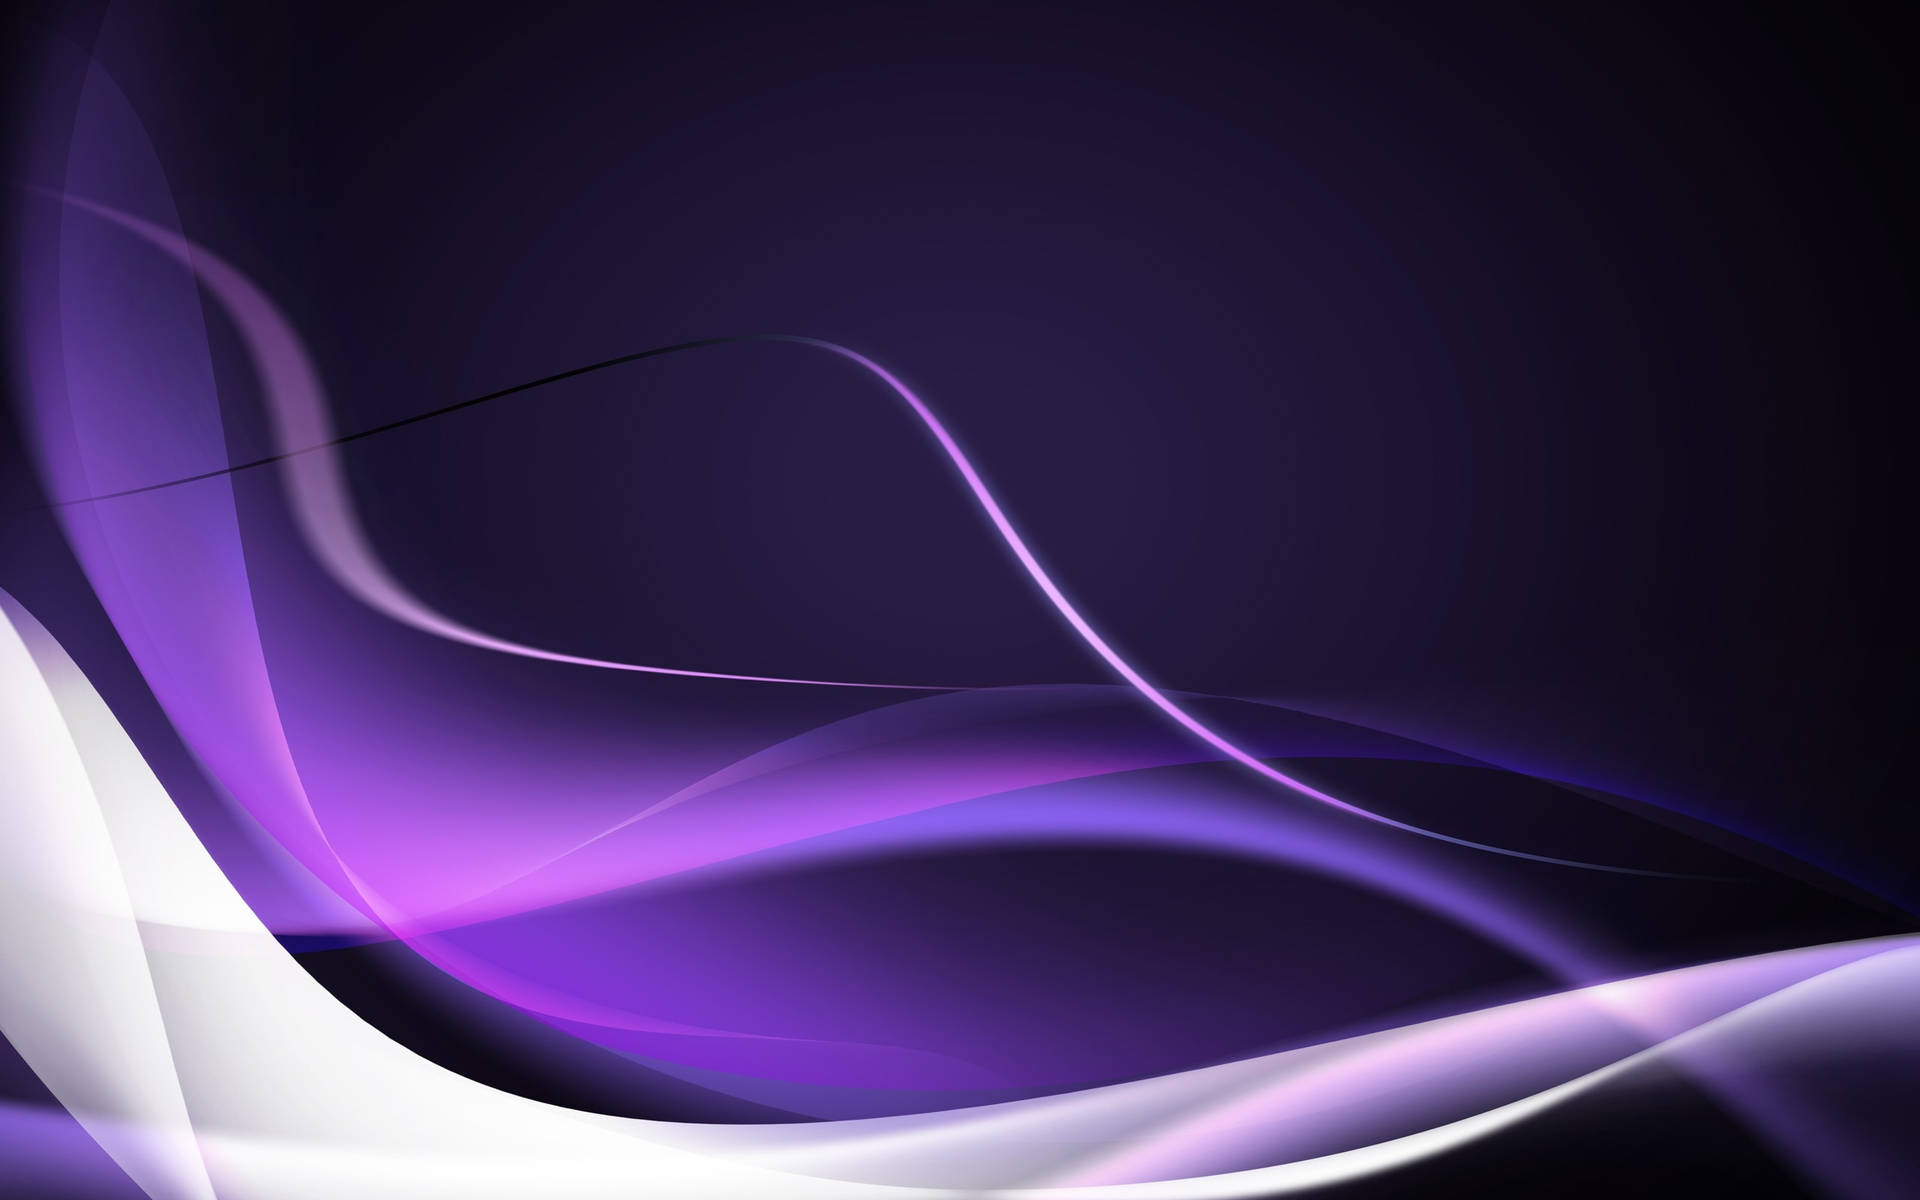 An Abstract Design Of Purple Waves